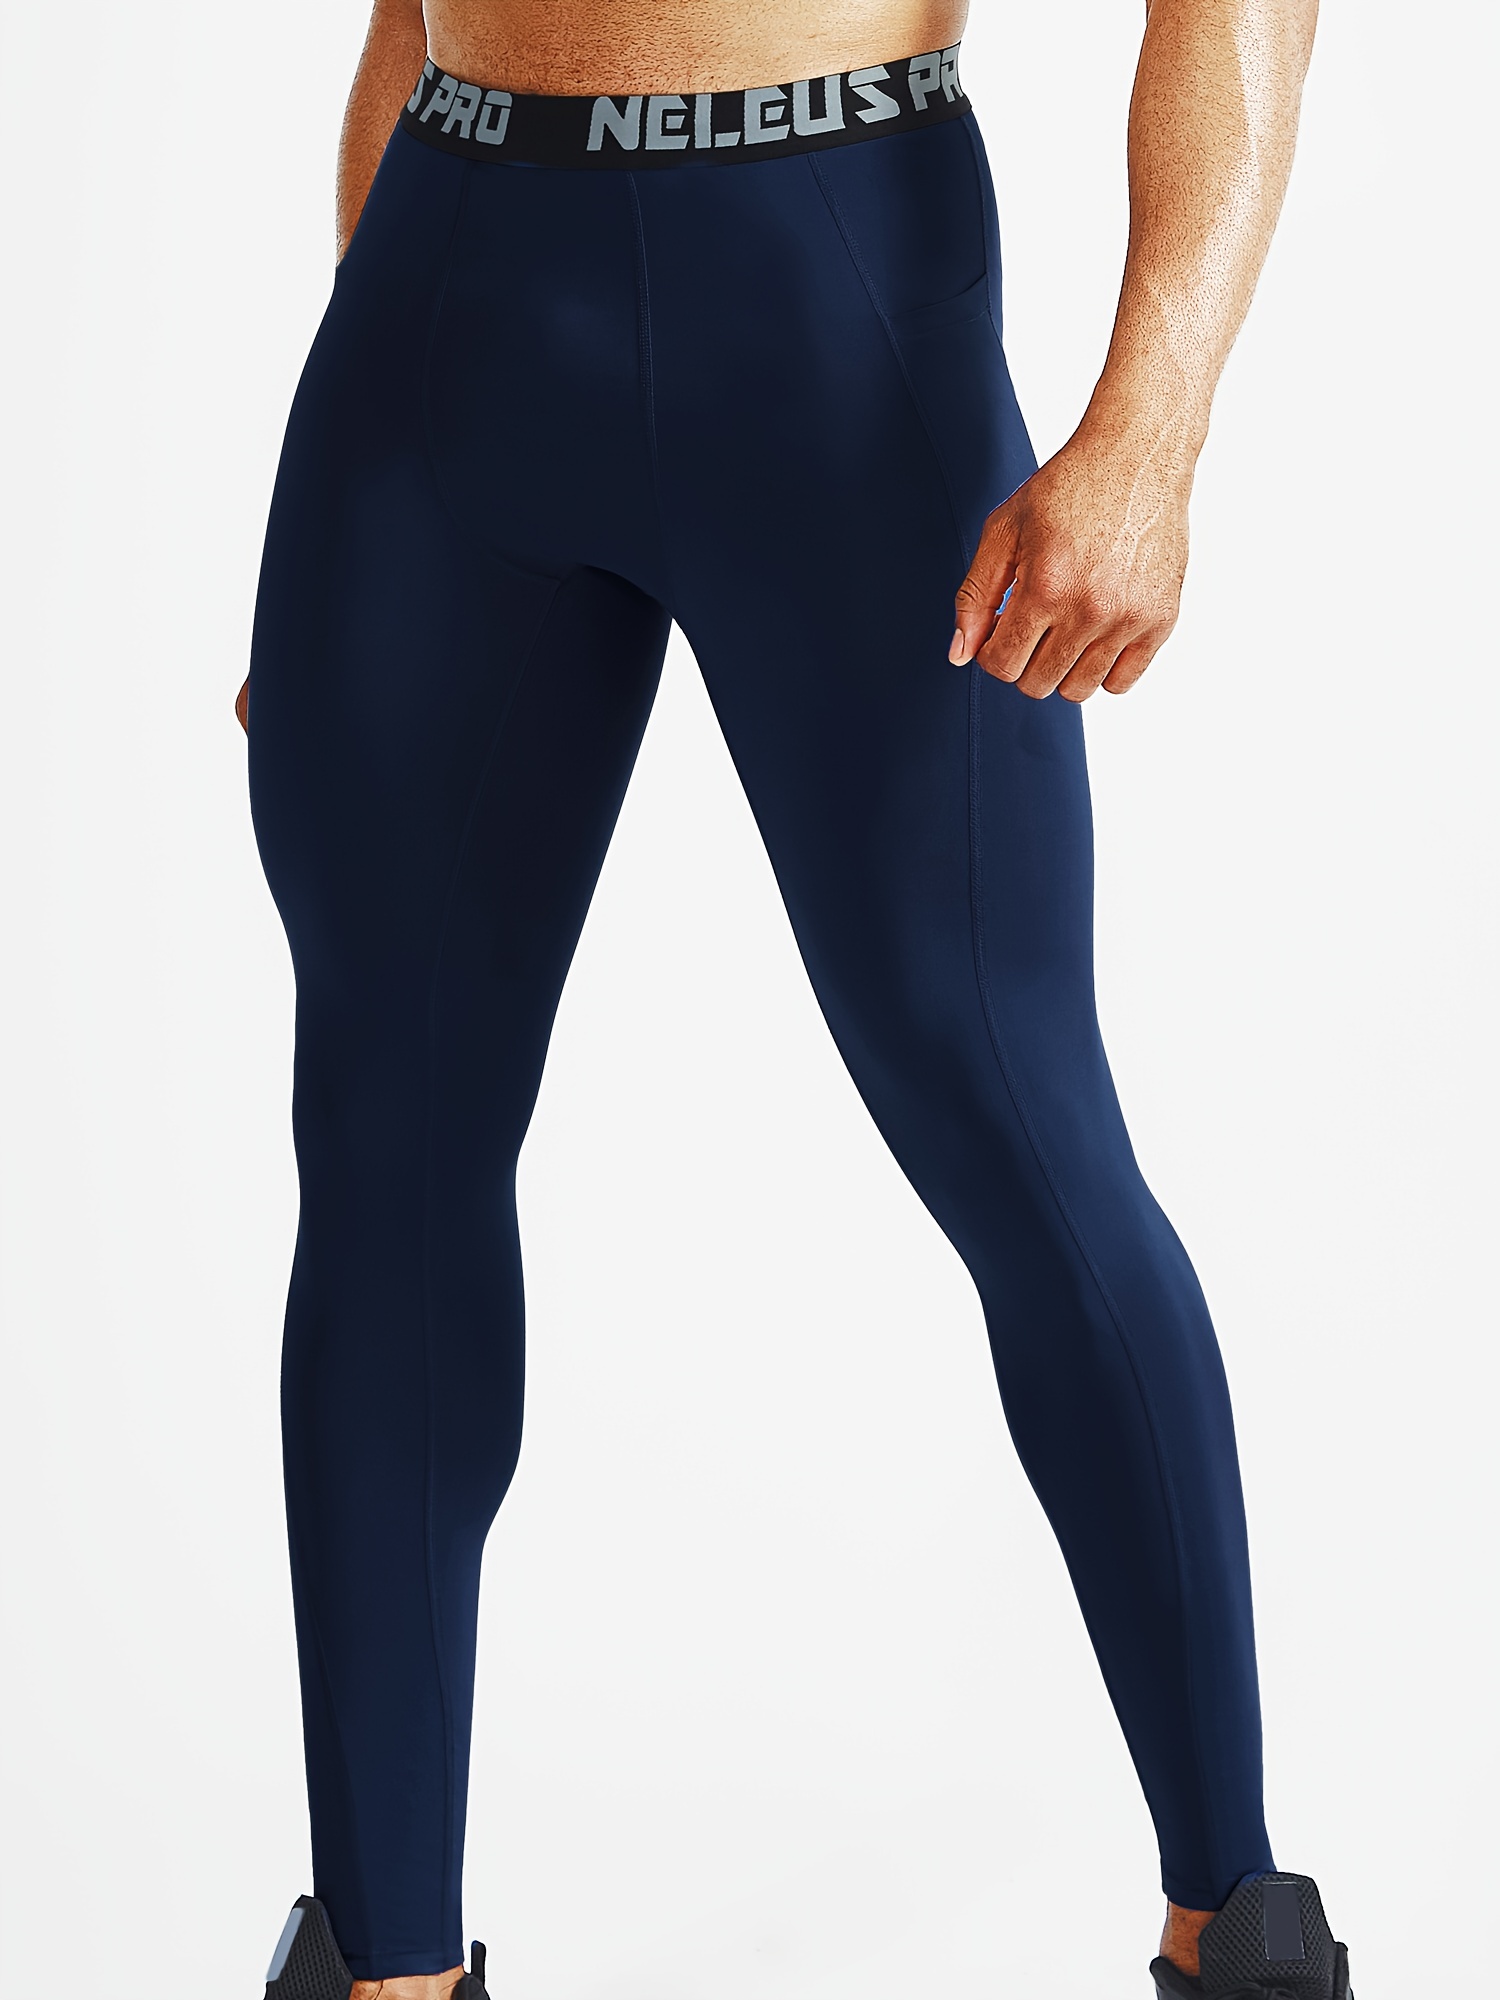 Buy DECISIVE Fitness Men's Skin Tights for Gym, Running, Cycling, Swimming,  Cricket,Yoga, Football, Tennis, Batminton and Many More Sports, Navy-Blue -  S at